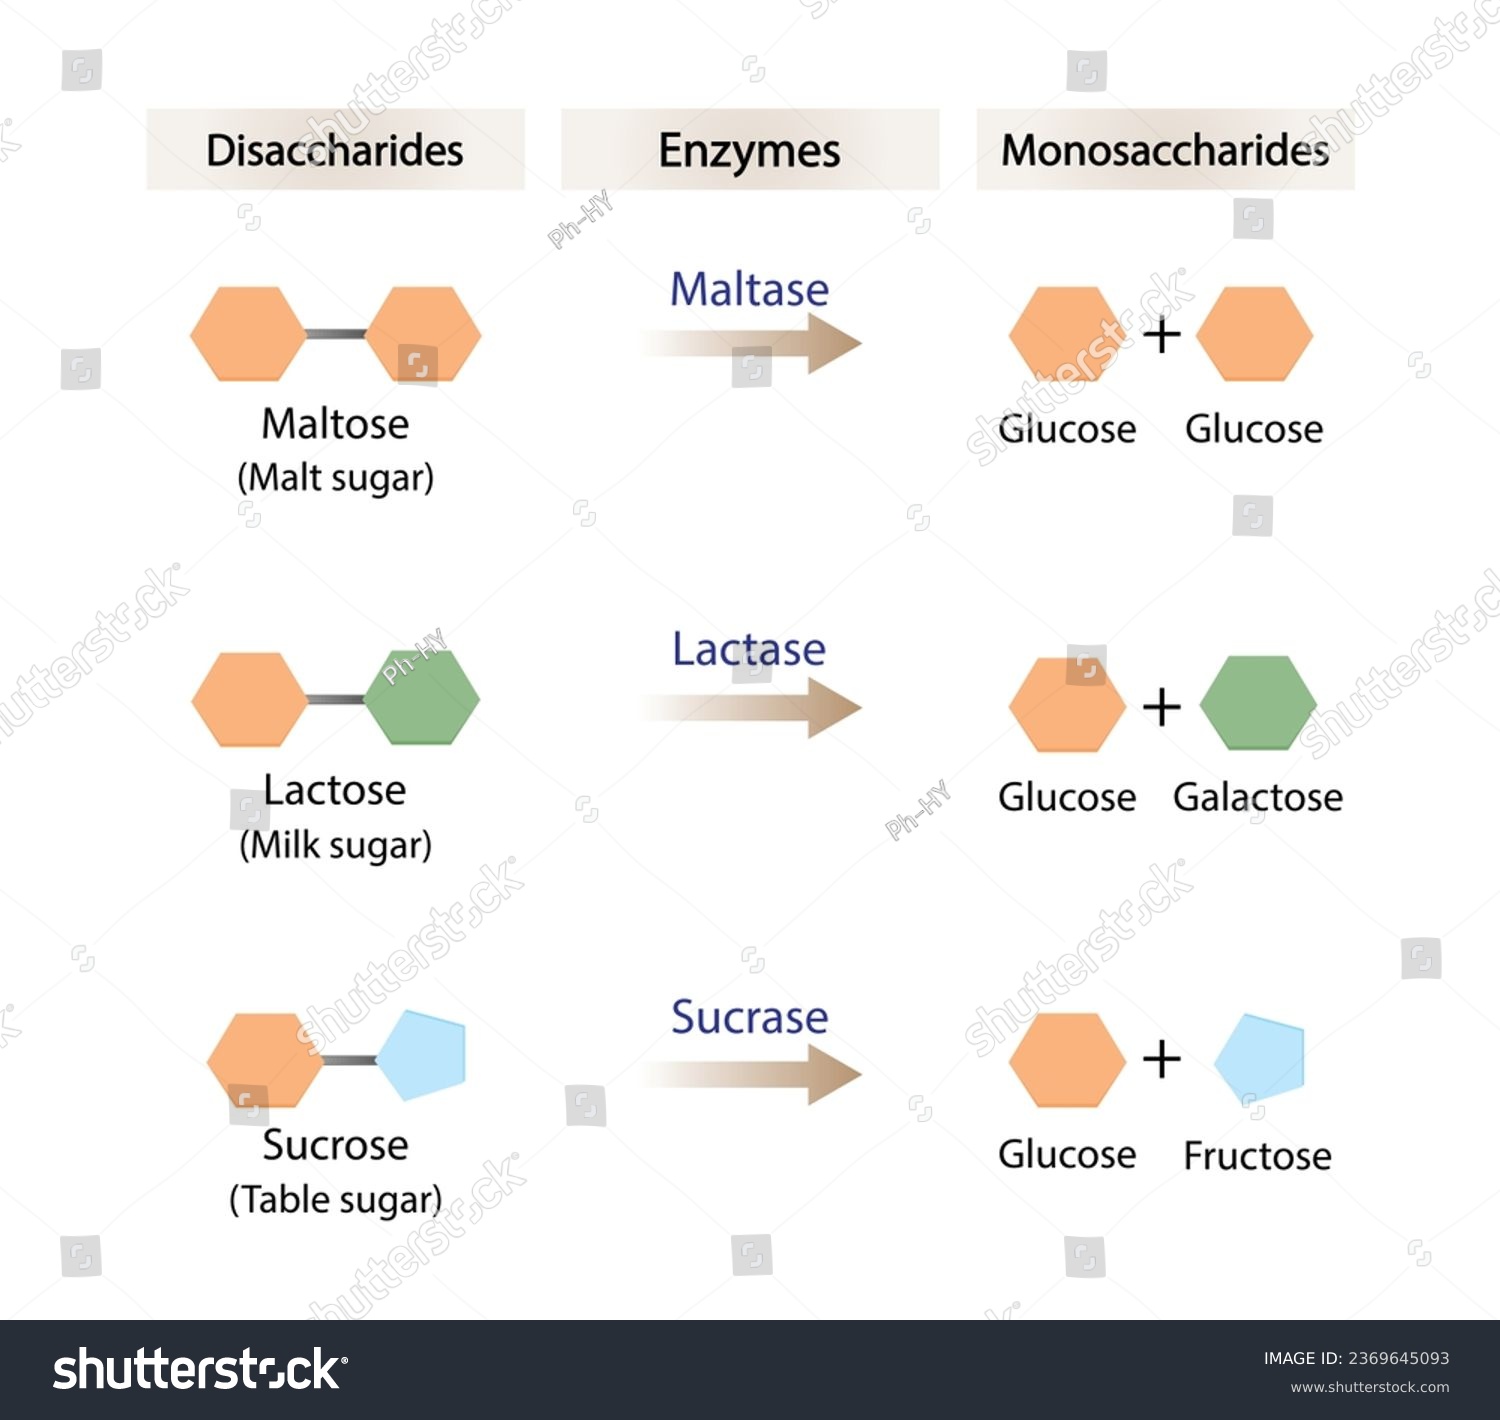 SVG of Carbohydrates Digestion. Maltase, Sucrase and Lactase Enzymes catalyze Disaccharides Maltose, Lactose and Sucrose to Monosaccharides, glucose, galactose and Fructose molecules. Vector Illustration. svg